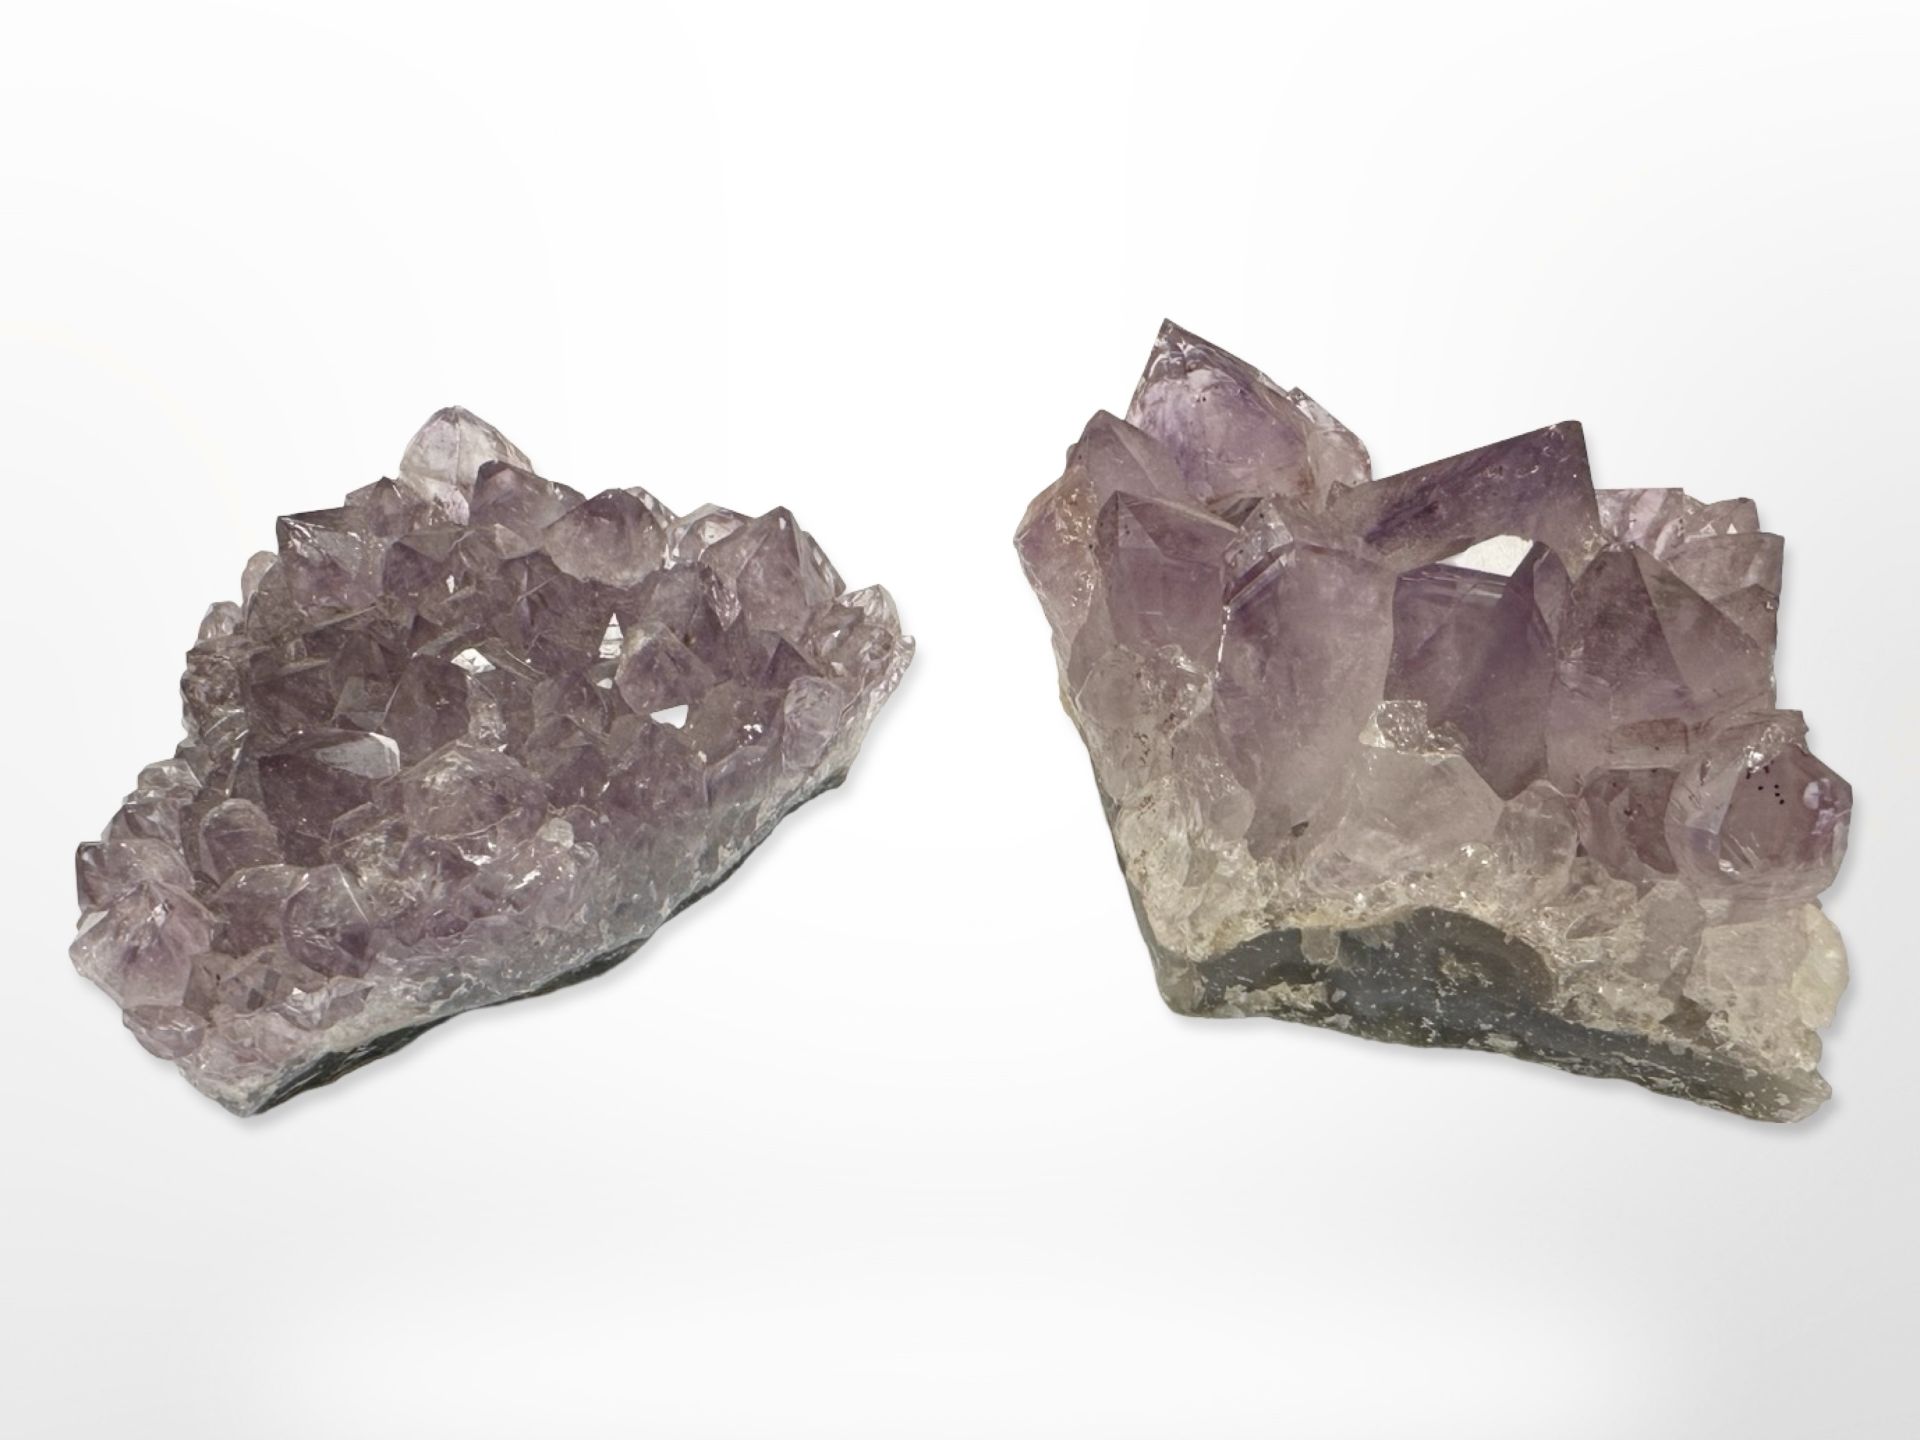 Two pieces of Amethyst rock crystal, each approximately 9 cm x 6 cm.